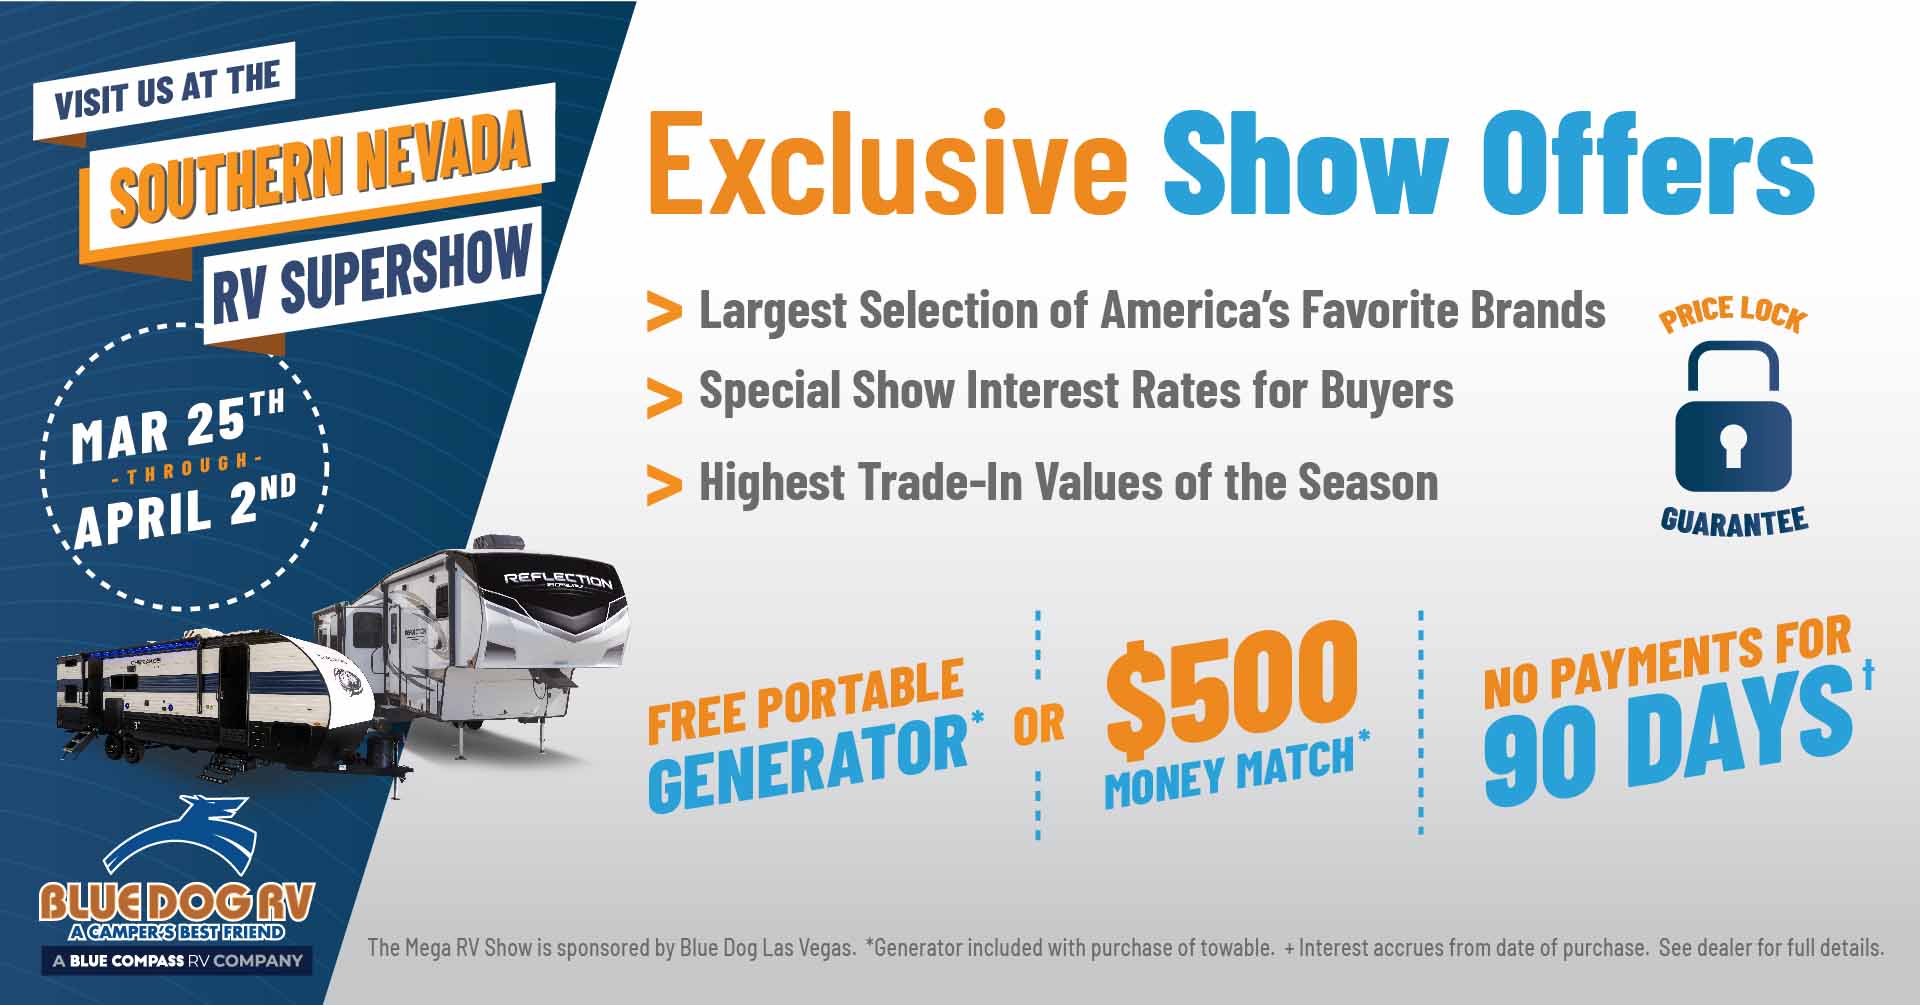 Exclusive Show Offers - Southern Nevada RV Supershow